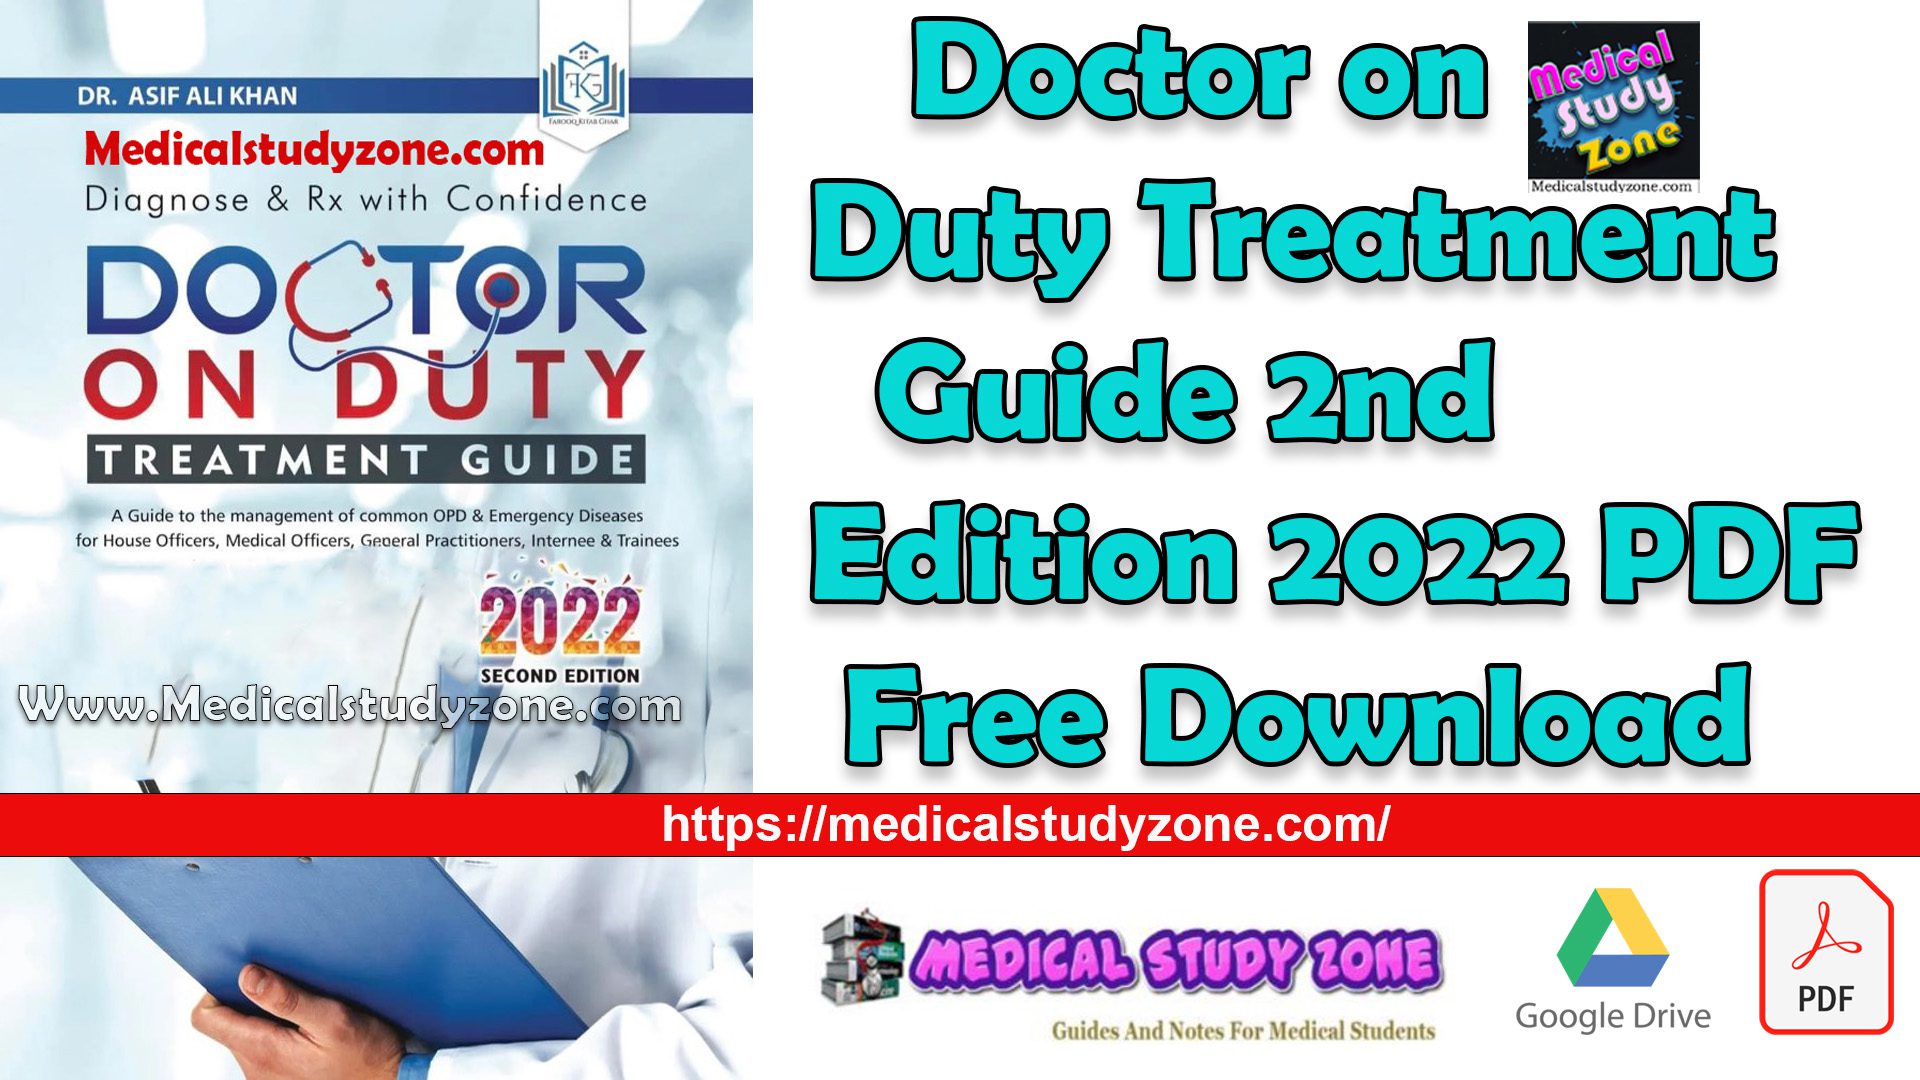 Doctor on Duty Treatment Guide 2nd Edition 2022 PDF Free Download